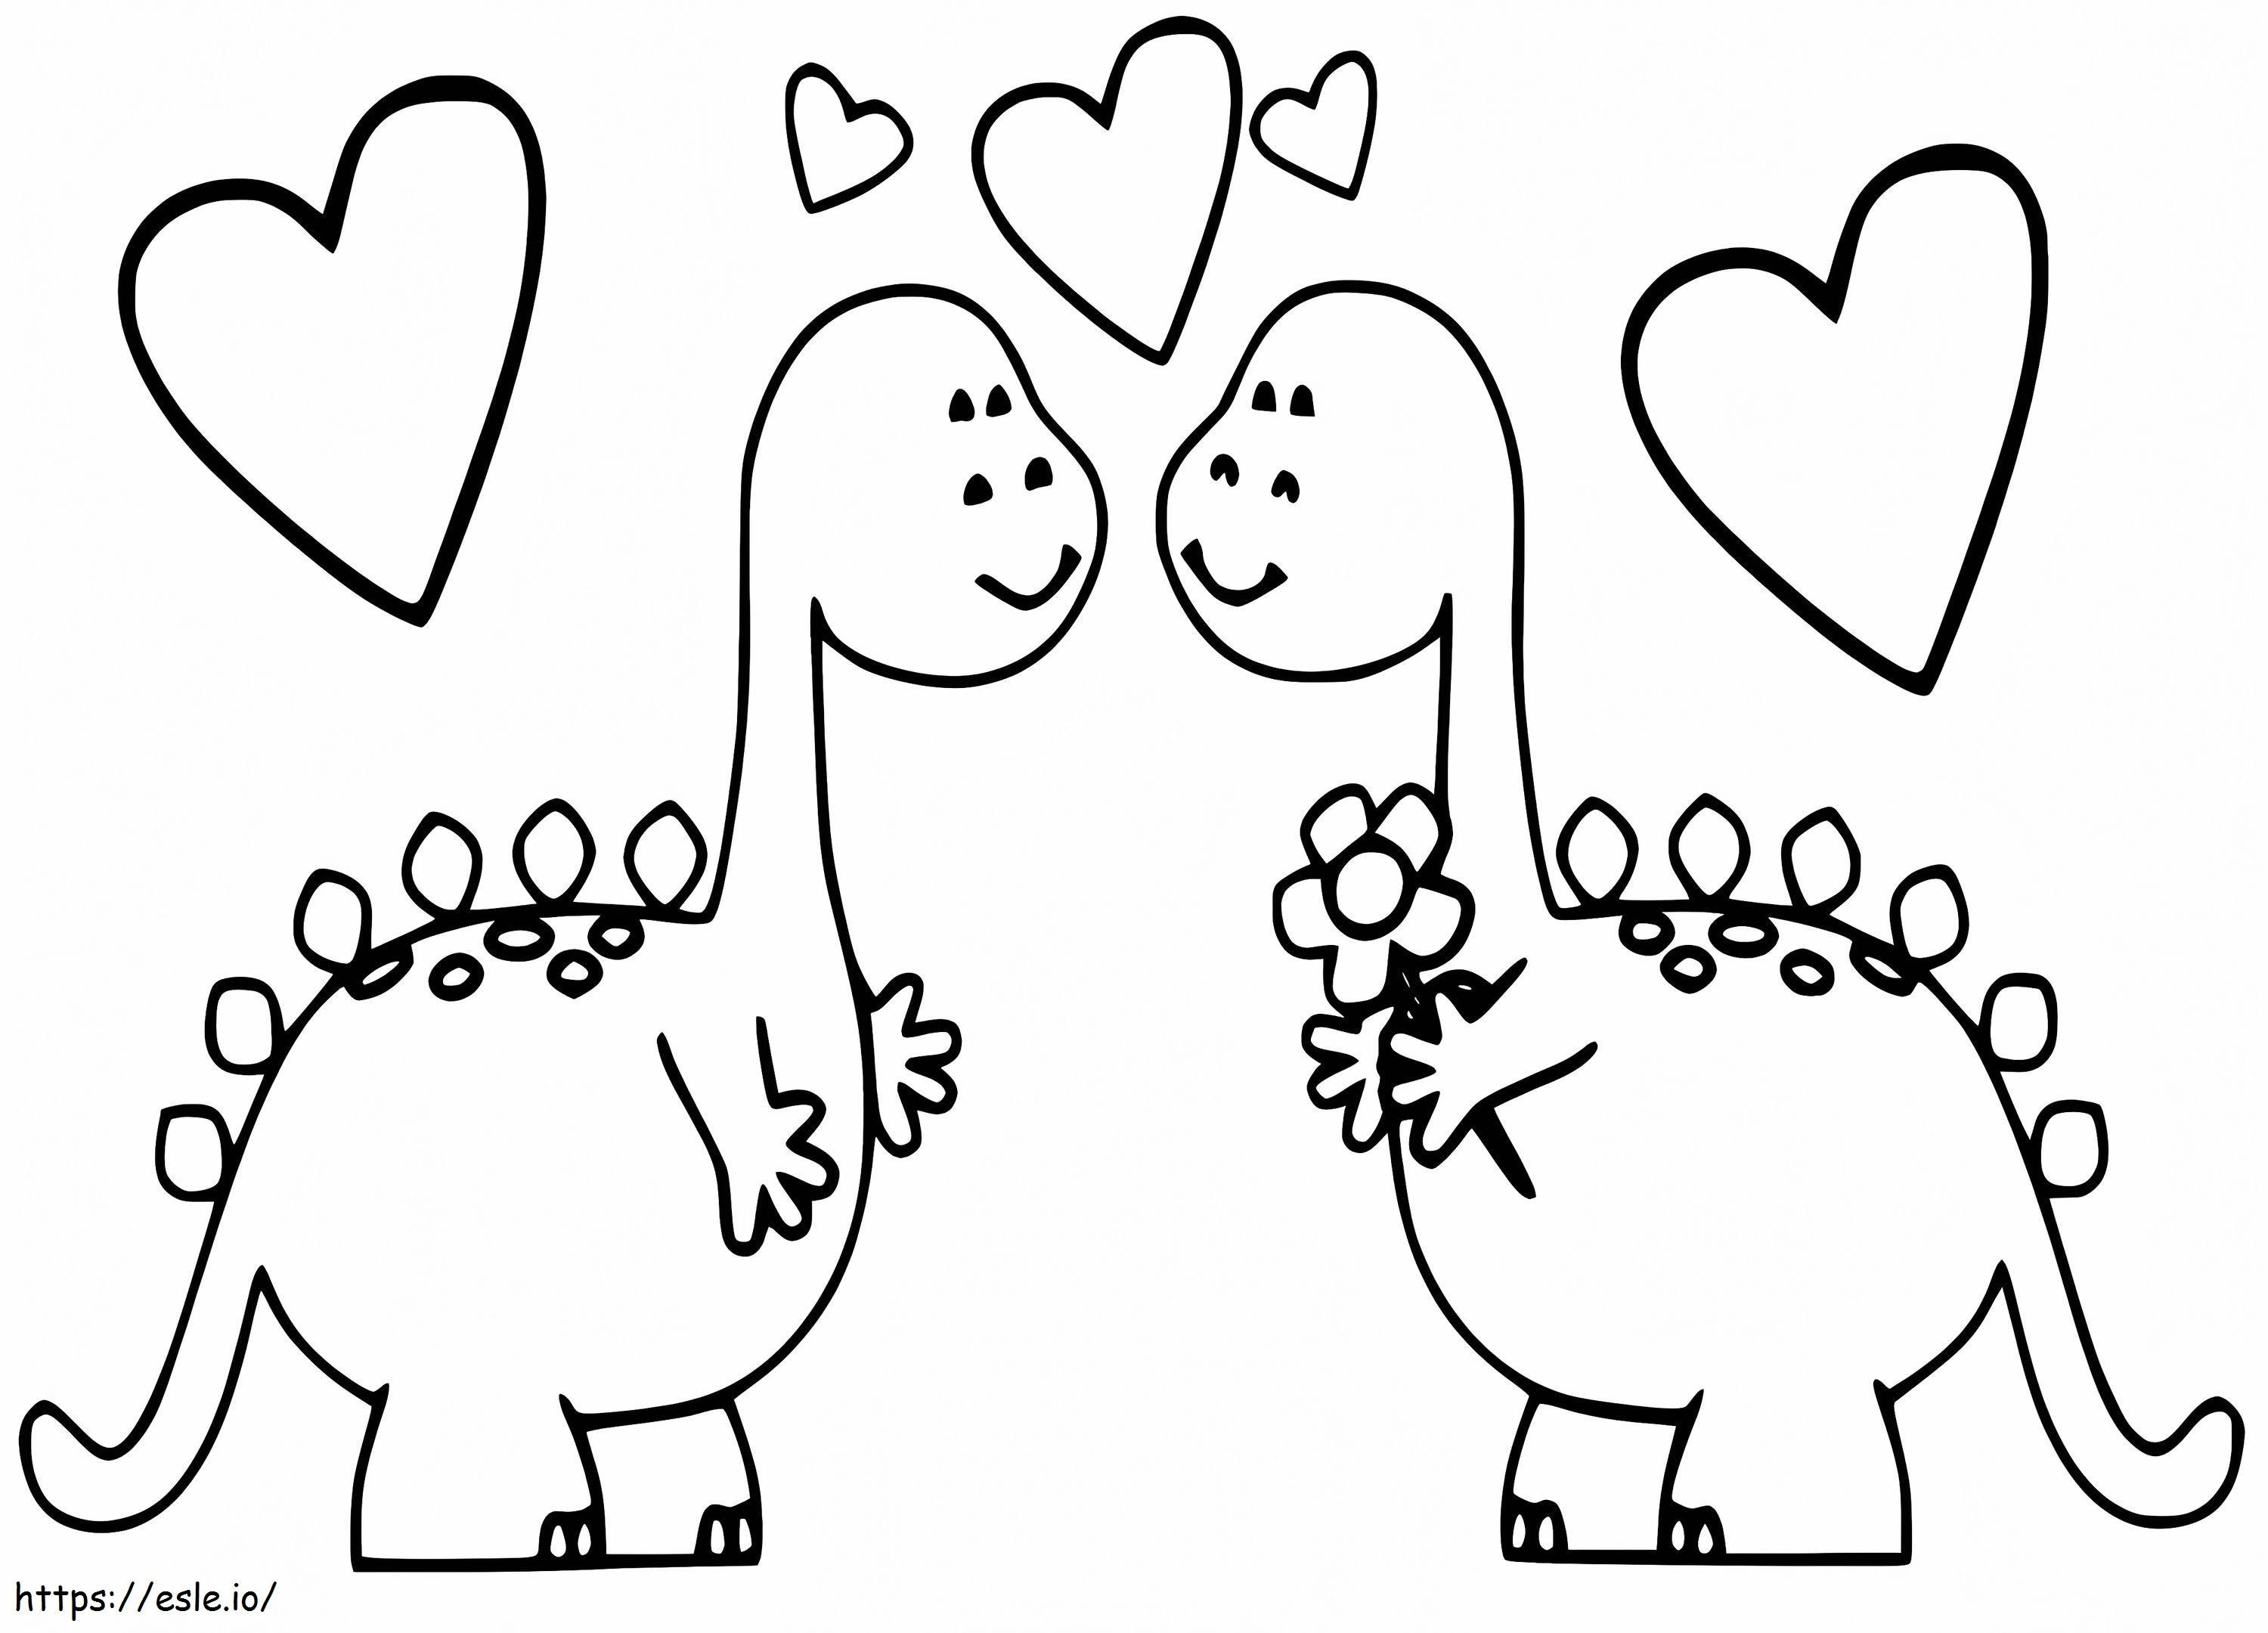 Dinosaur Couple coloring page